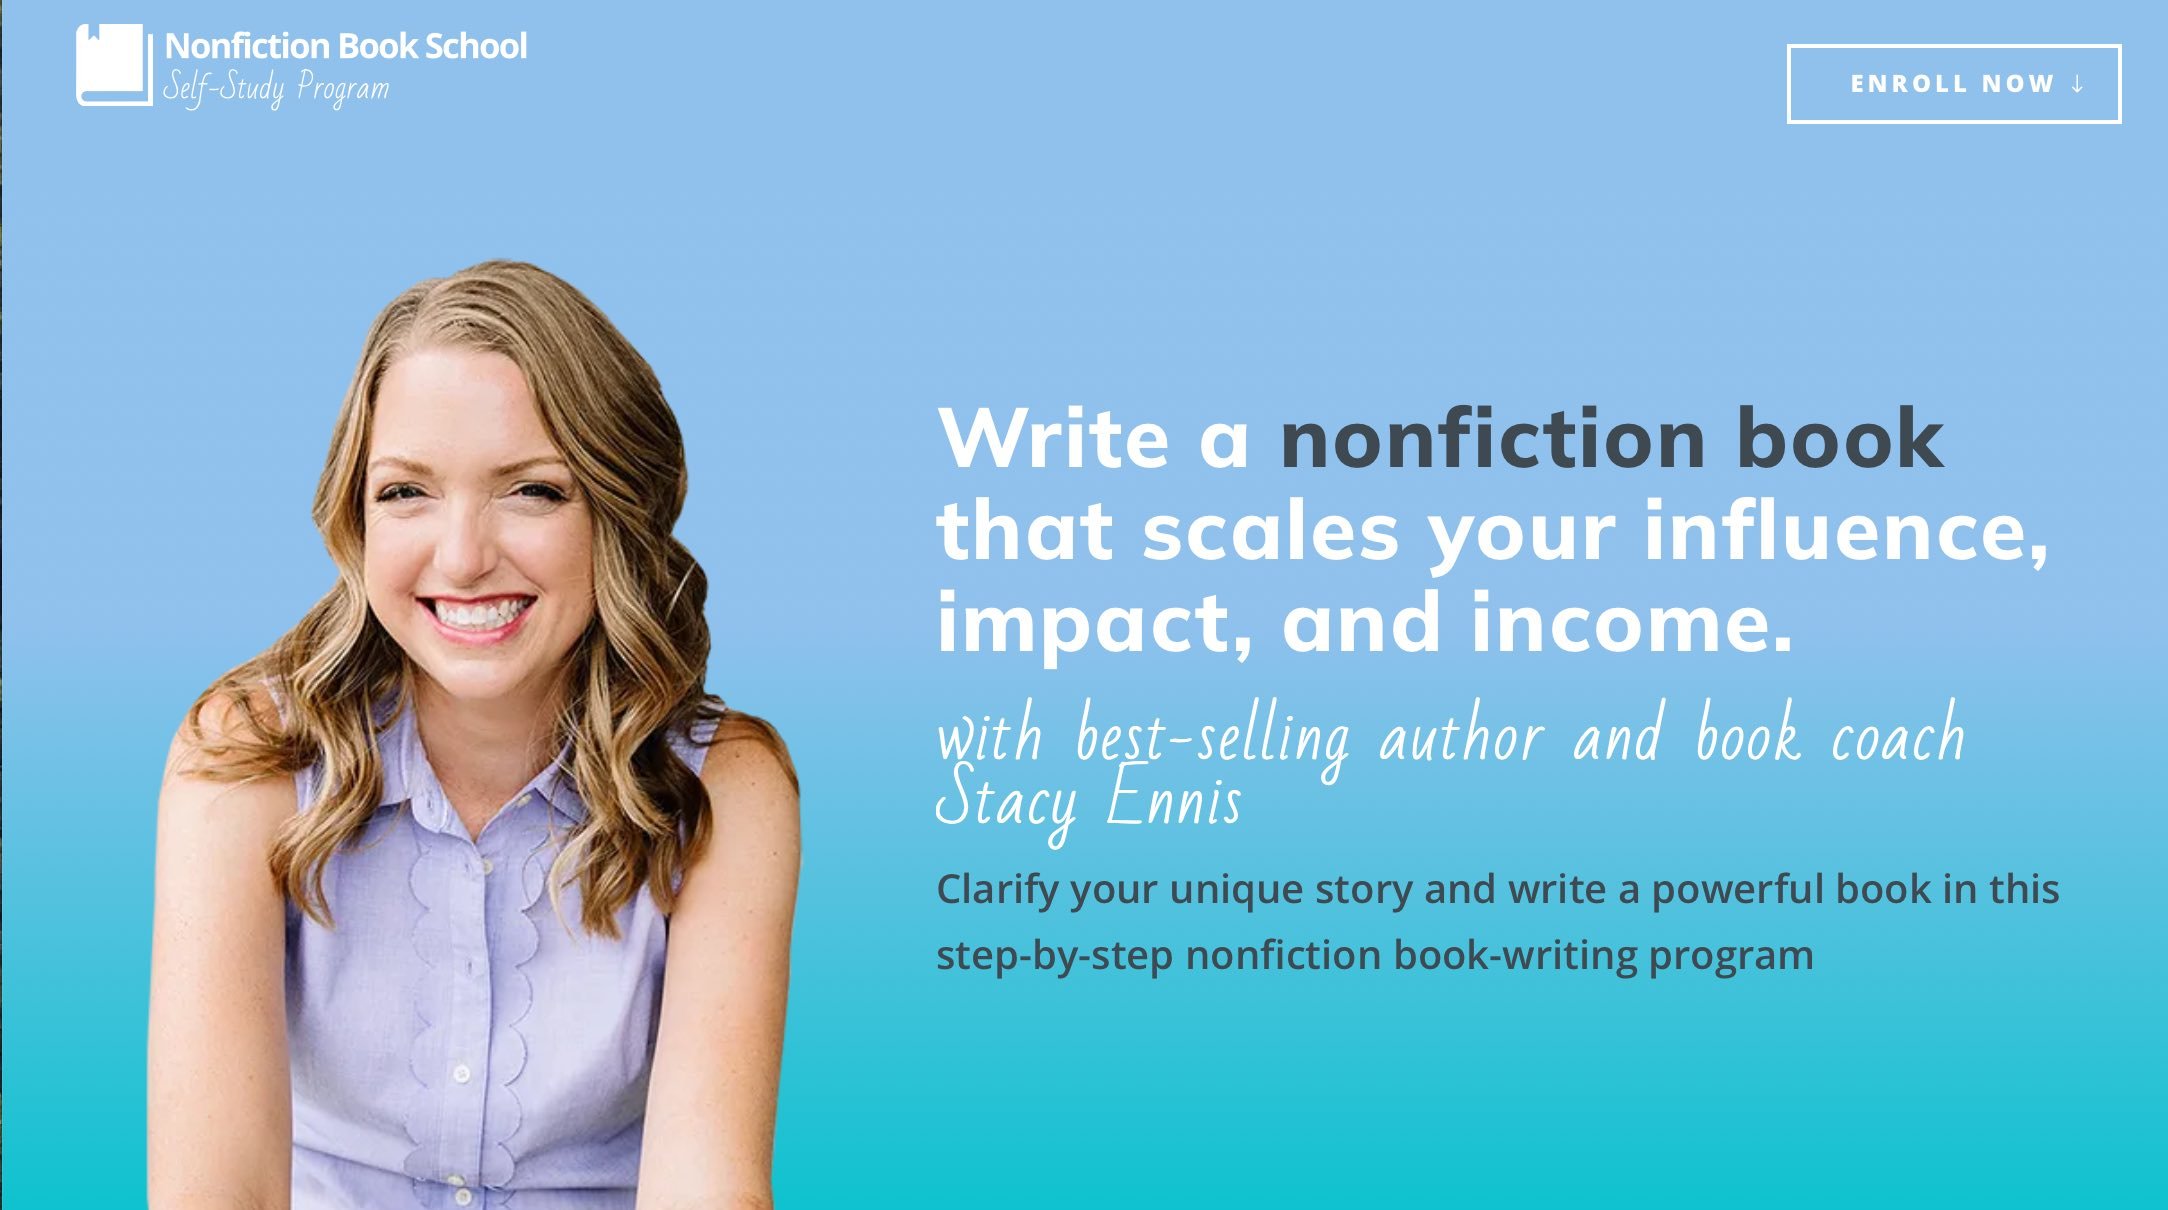 Scale your Influence, Impact, and Income at Nonfiction Book School (with Stacy Ennis)